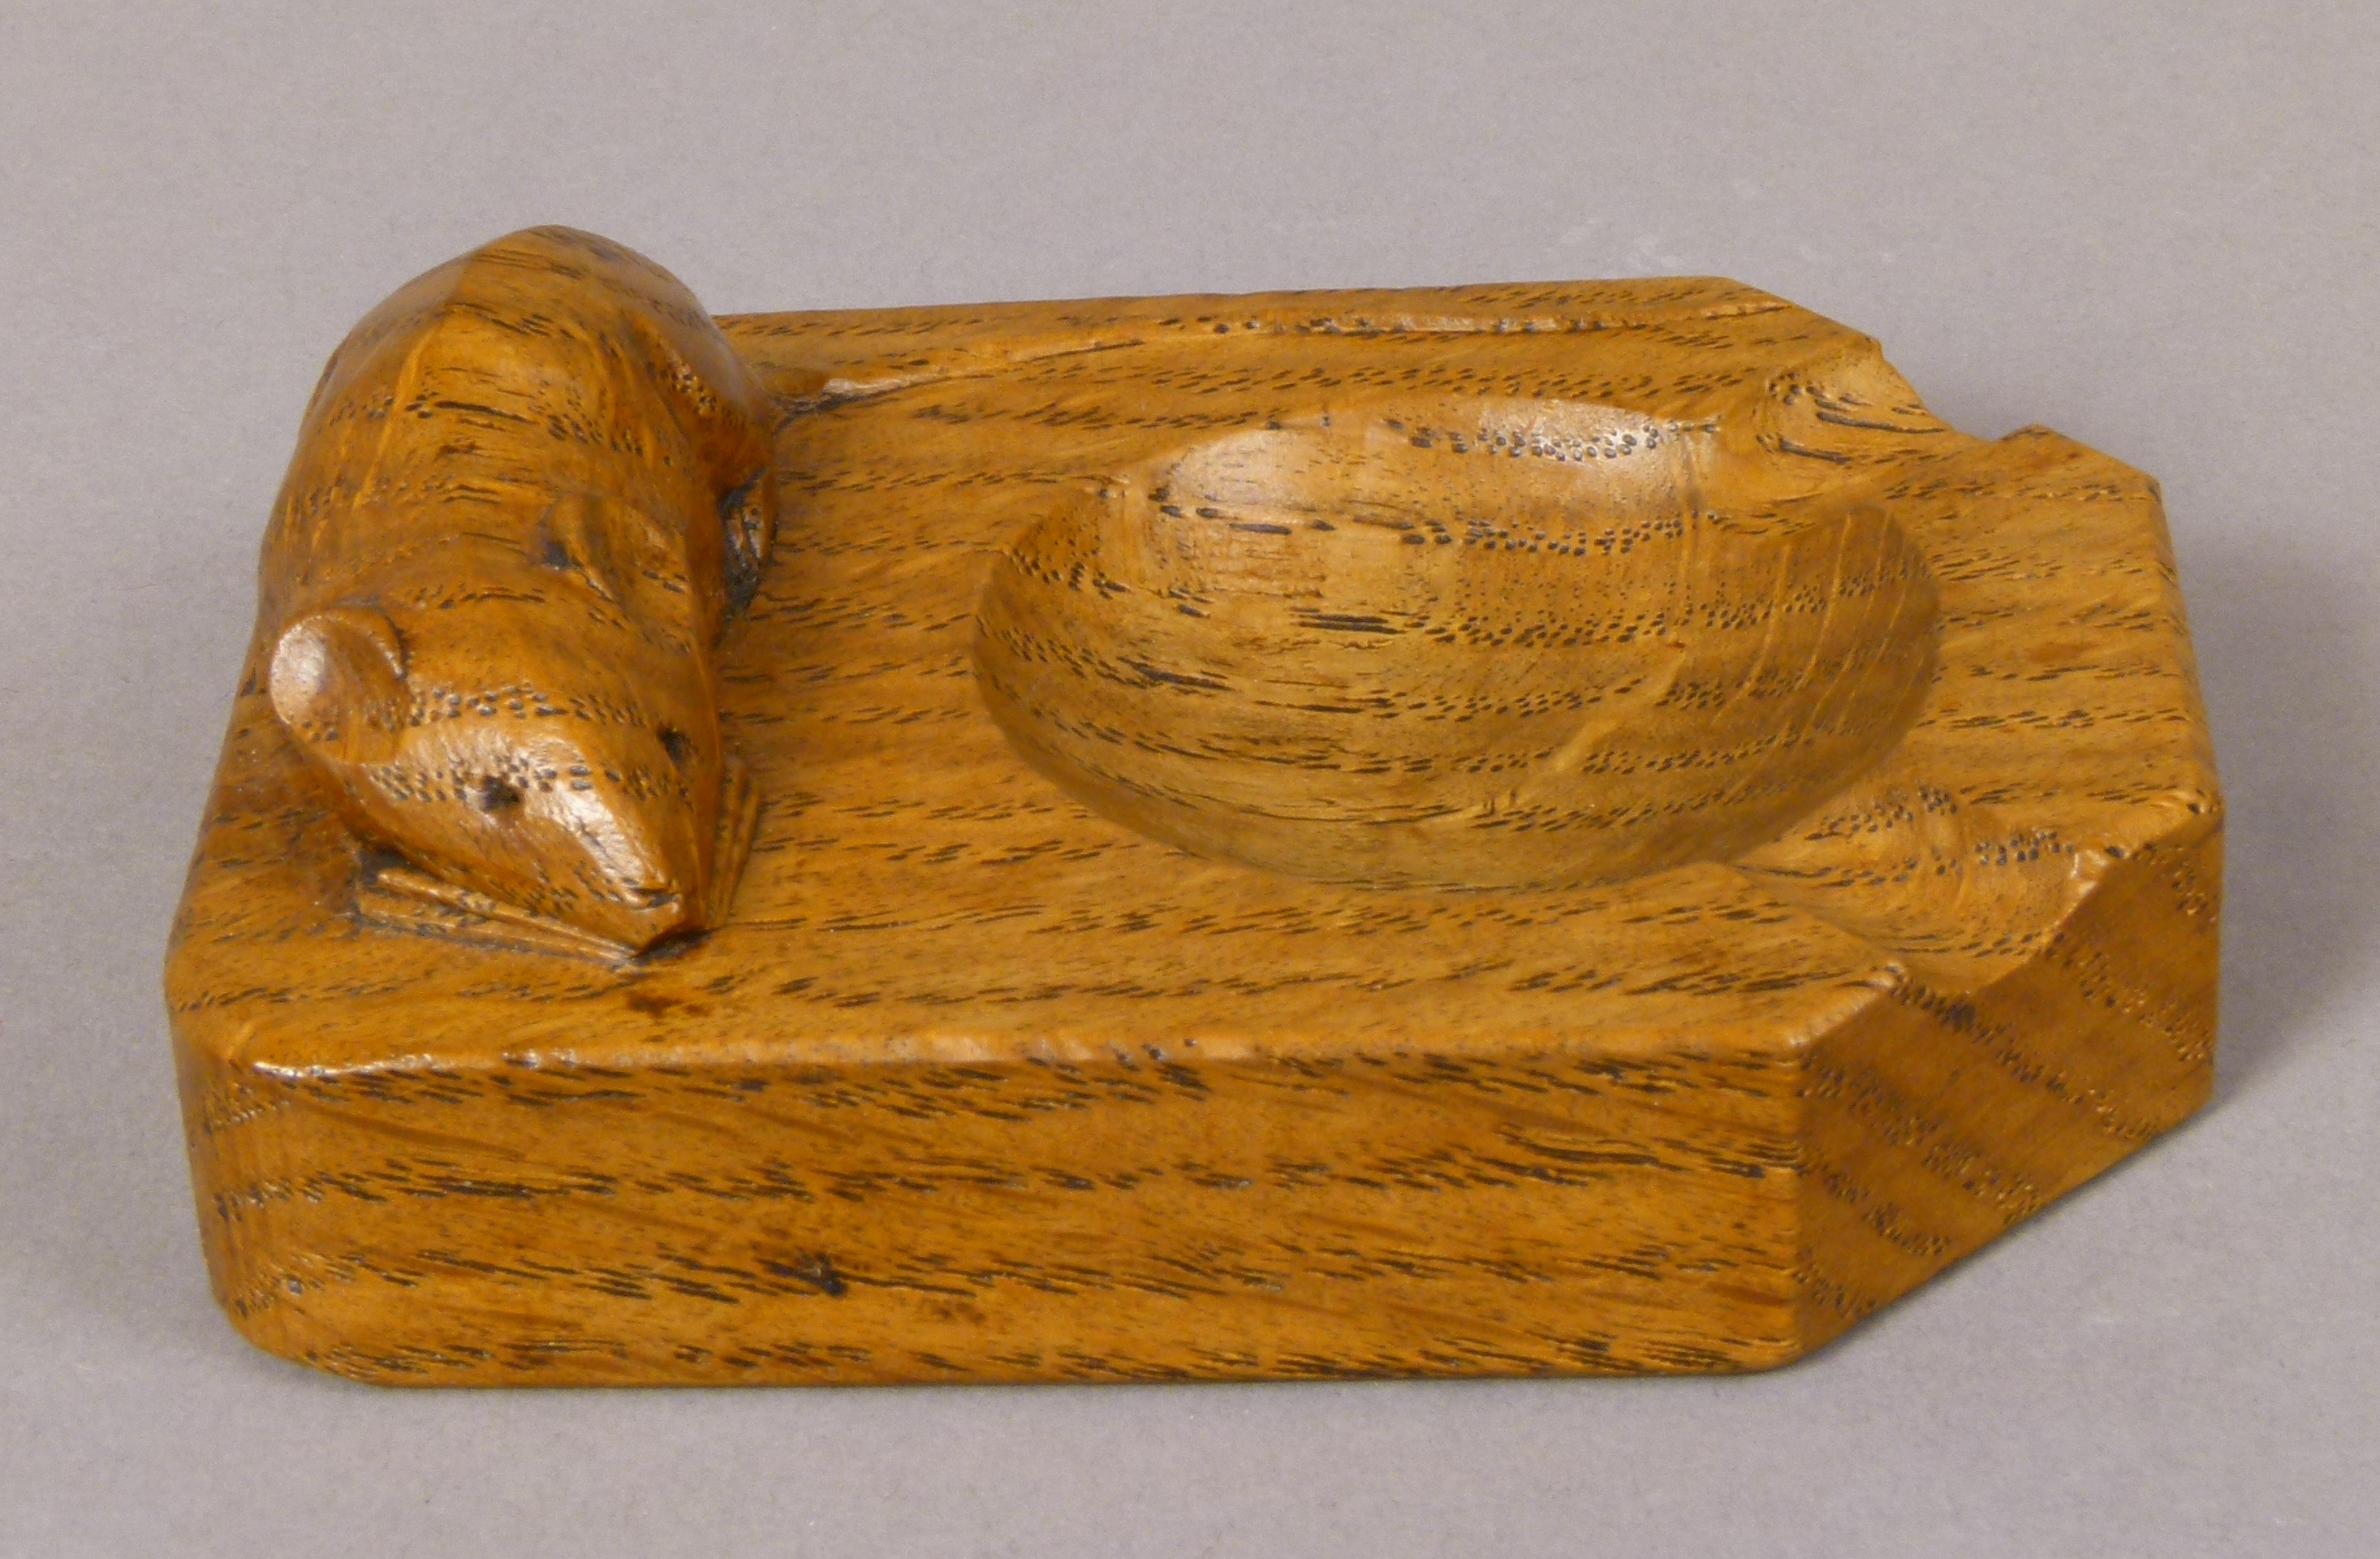 A THOMPSON OF KILBURN 'MOUSEMAN' ENGLISH OAK ASHTRAY, rectangular carved in relief with a mouse,